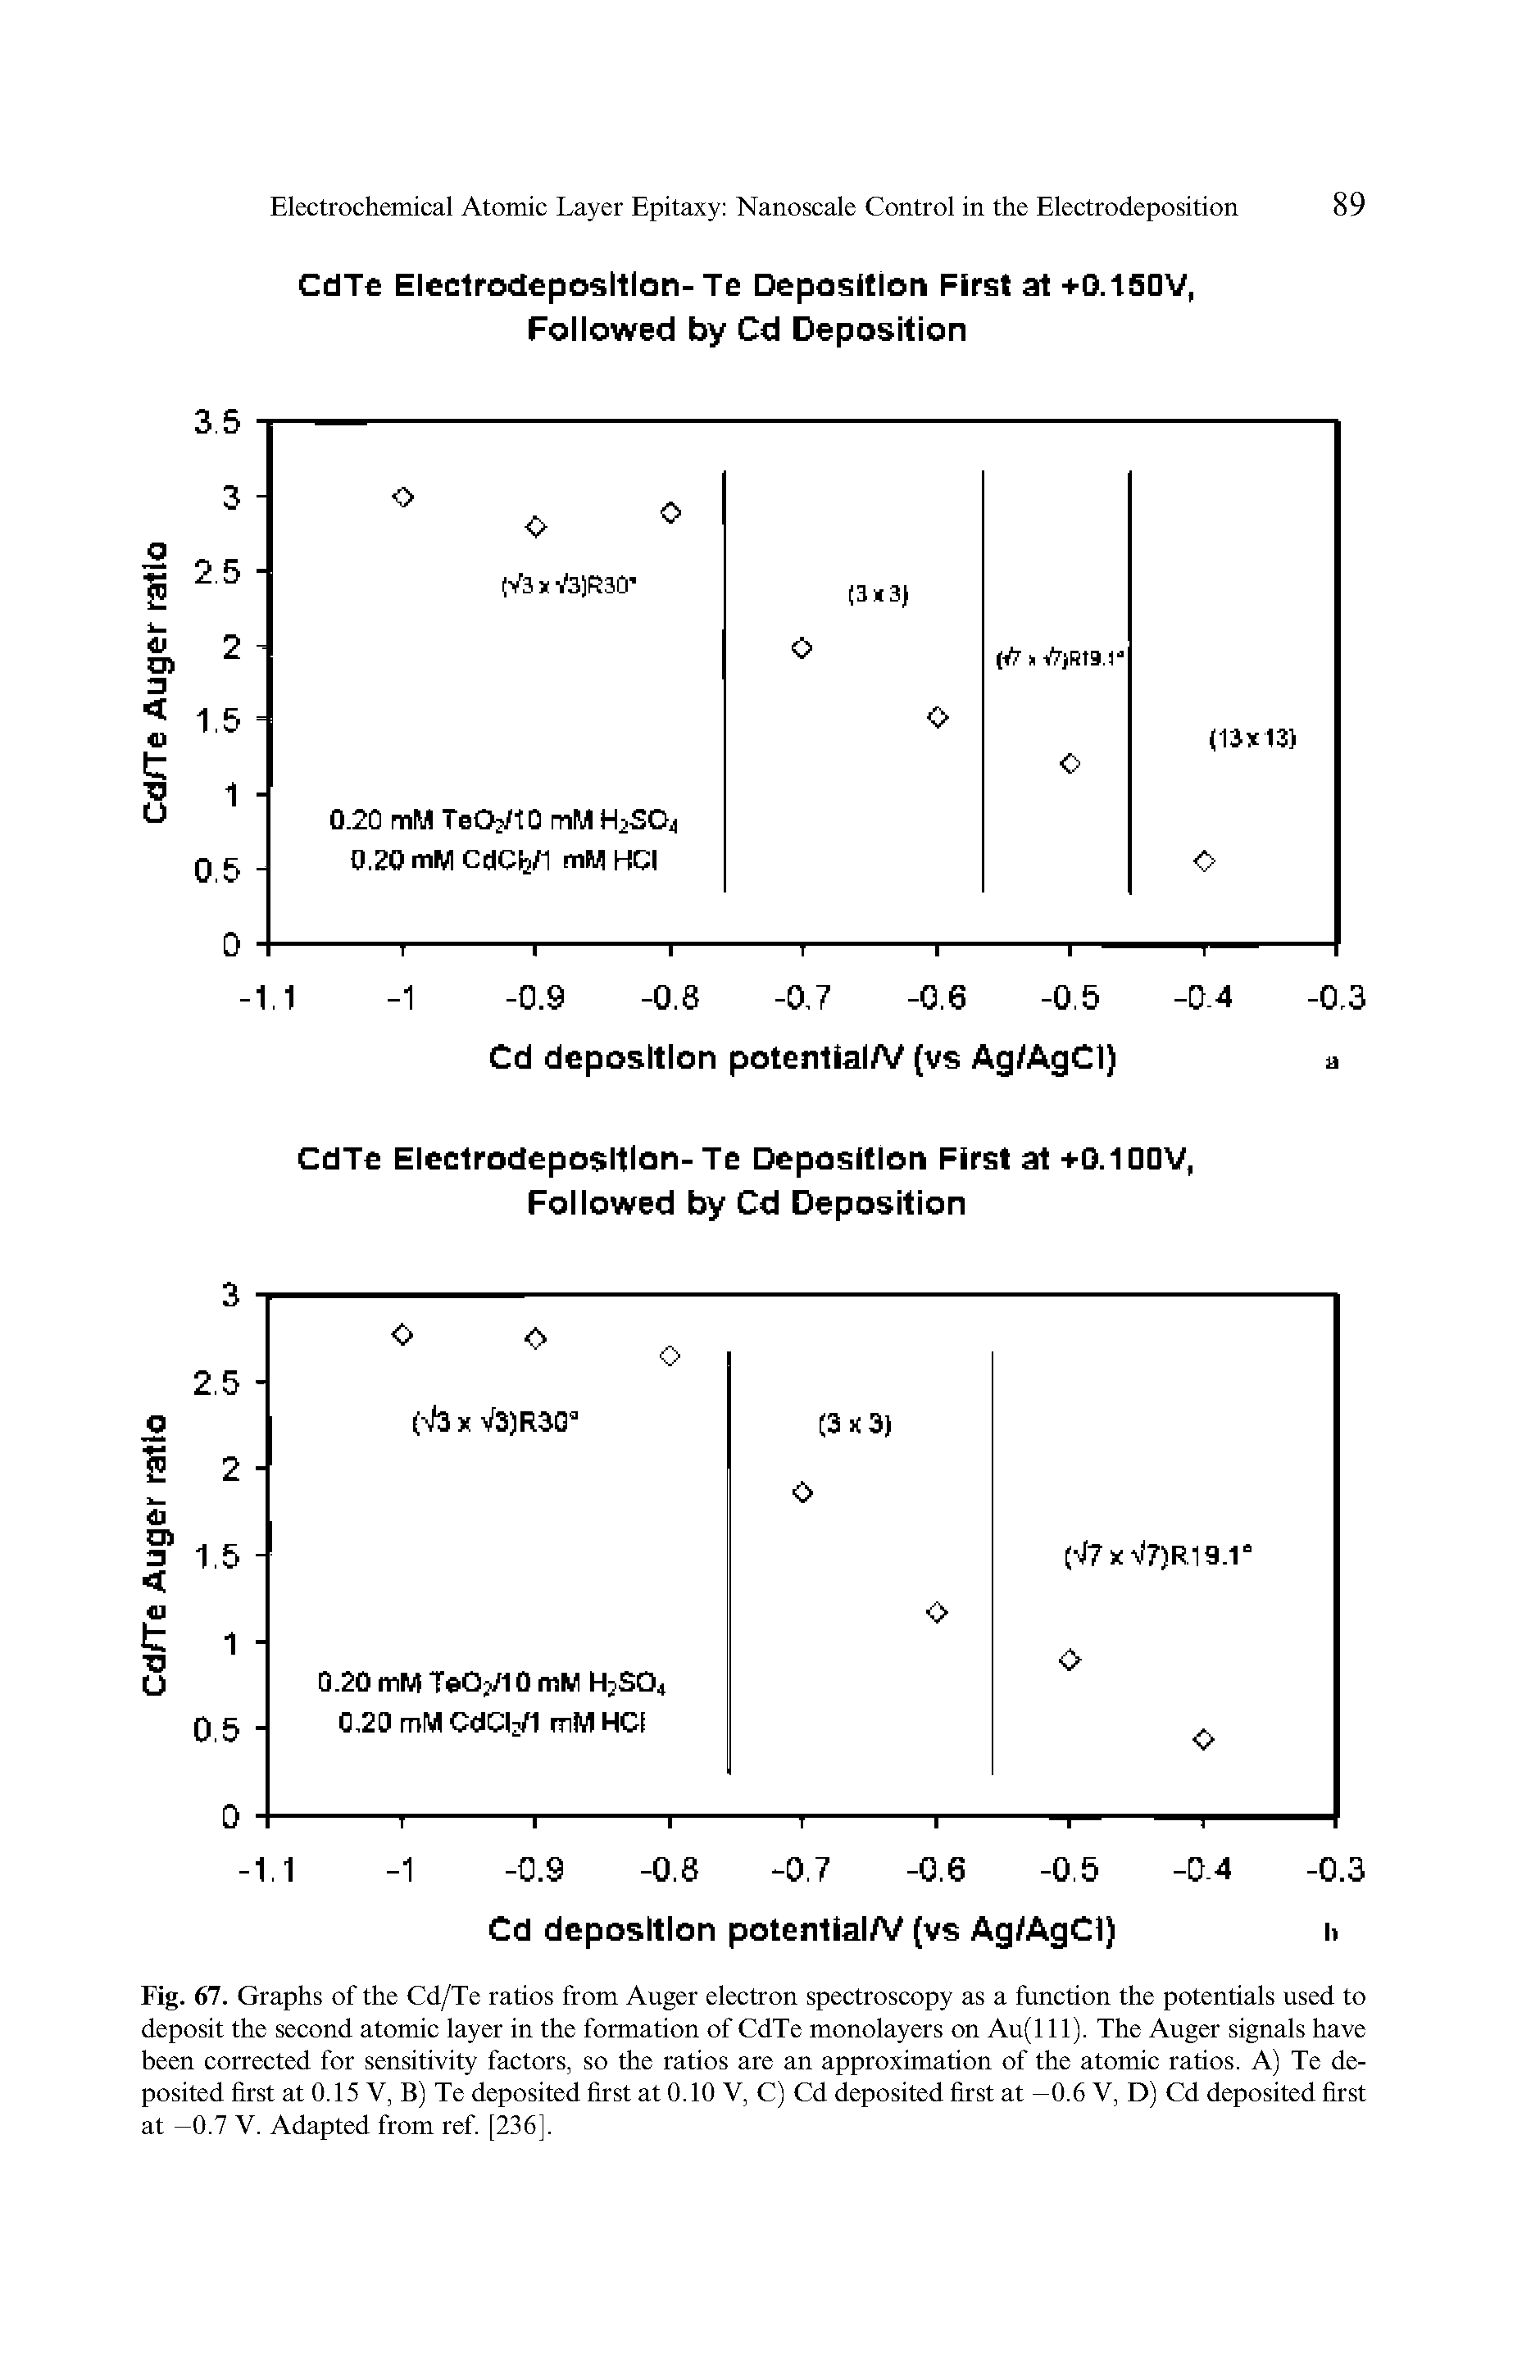 Fig. 67. Graphs of the Cd/Te ratios from Auger electron spectroscopy as a function the potentials used to deposit the second atomic layer in the formation of CdTe monolayers on Au(lll). The Auger signals have been corrected for sensitivity factors, so the ratios are an approximation of the atomic ratios. A) Te deposited first at 0.15 V, B) Te deposited first at 0.10 V, C) Cd deposited first at —0.6 V, D) Cd deposited first at —0.7 V. Adapted from ref. [236],...